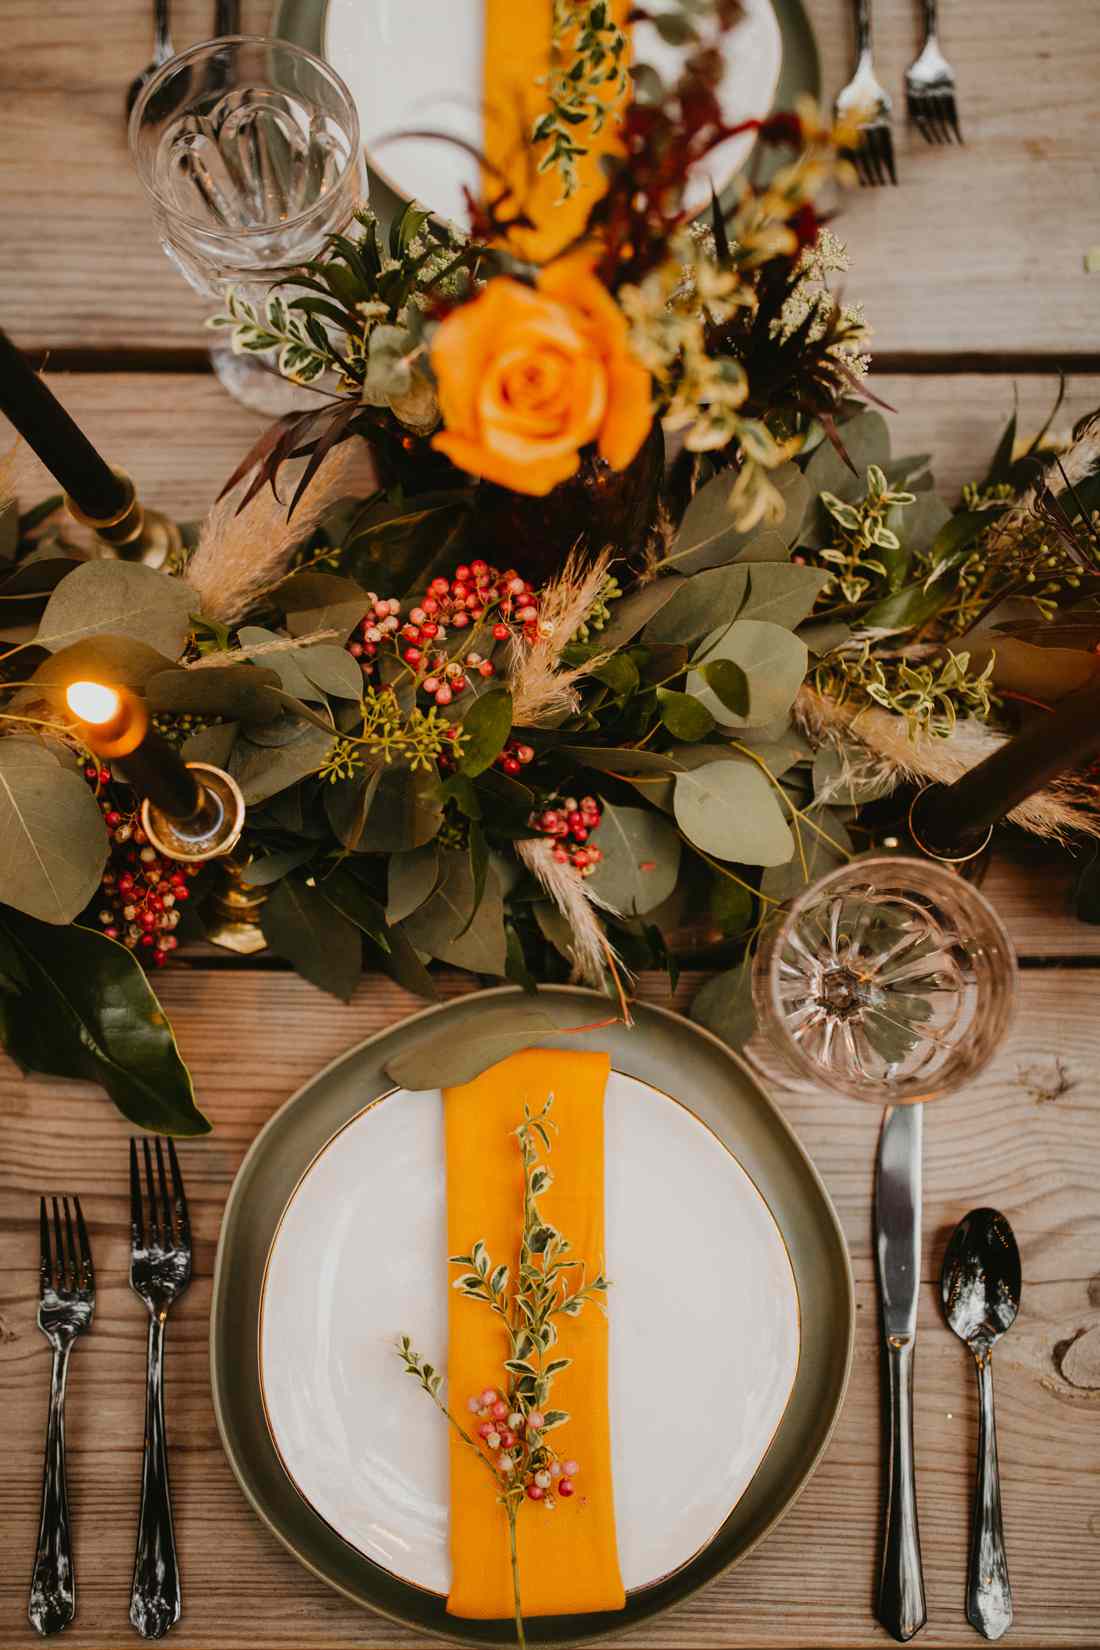 orange accented place setting with floral centerpiece